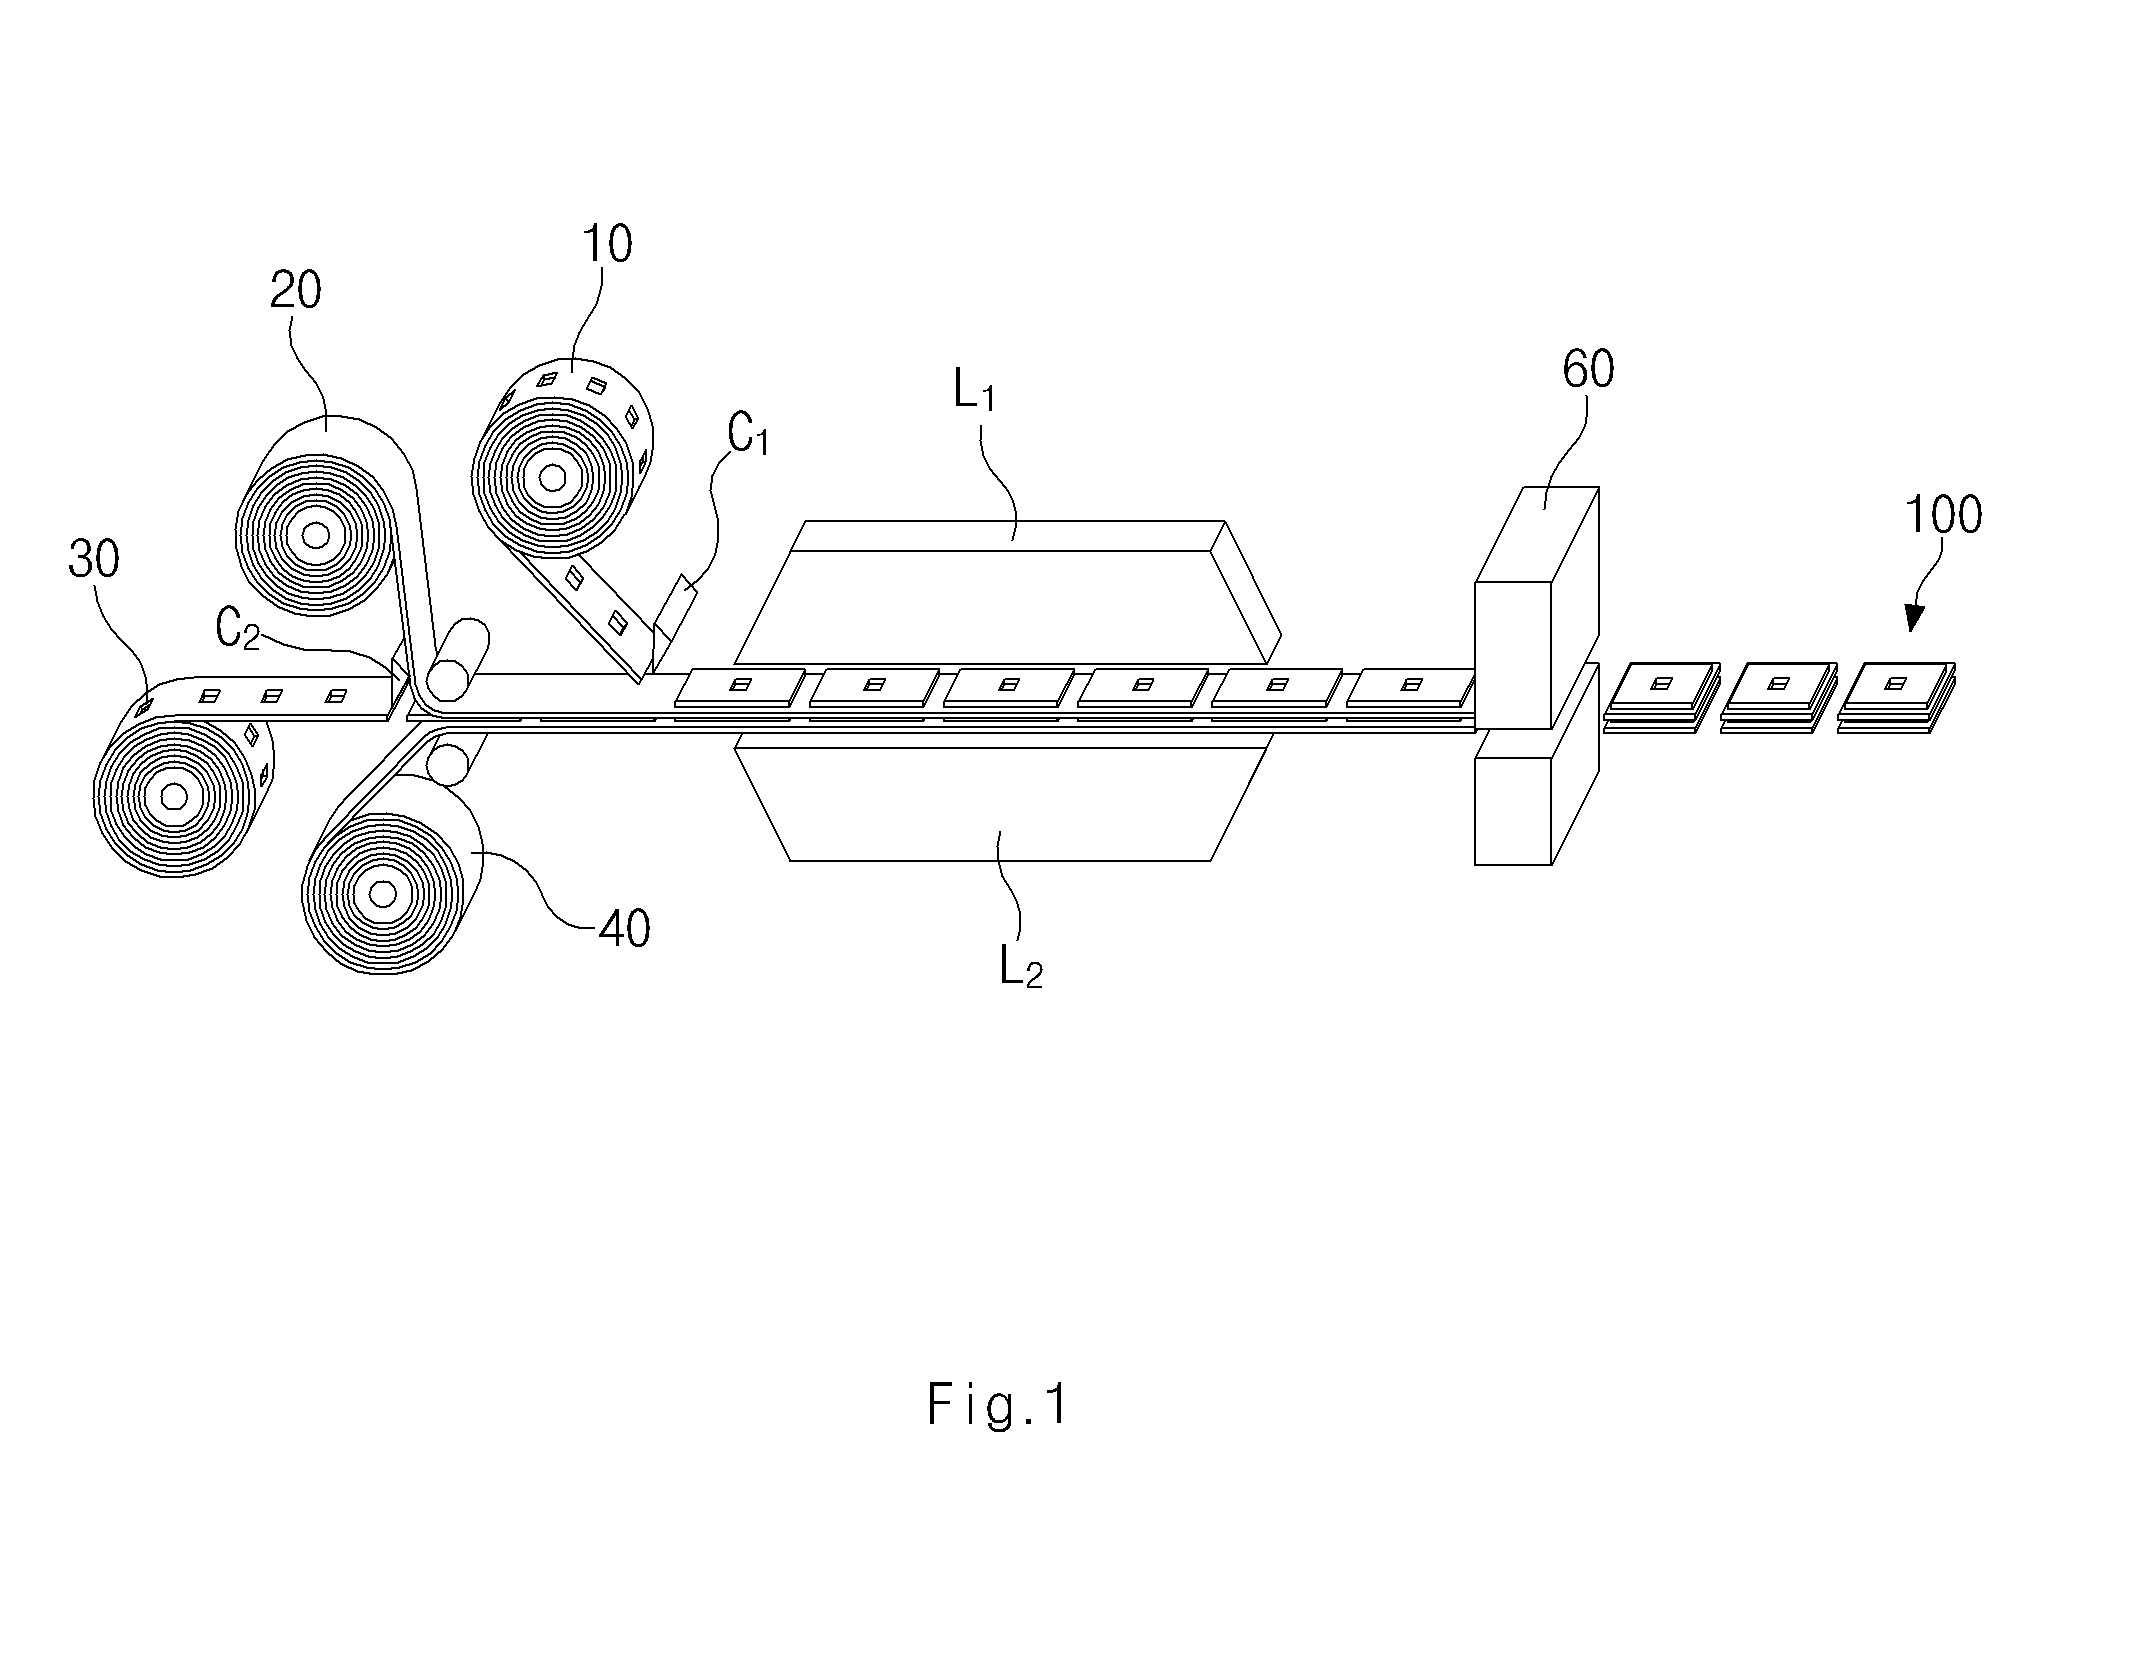 Electrode assembly manufacturing method including separator cutting process